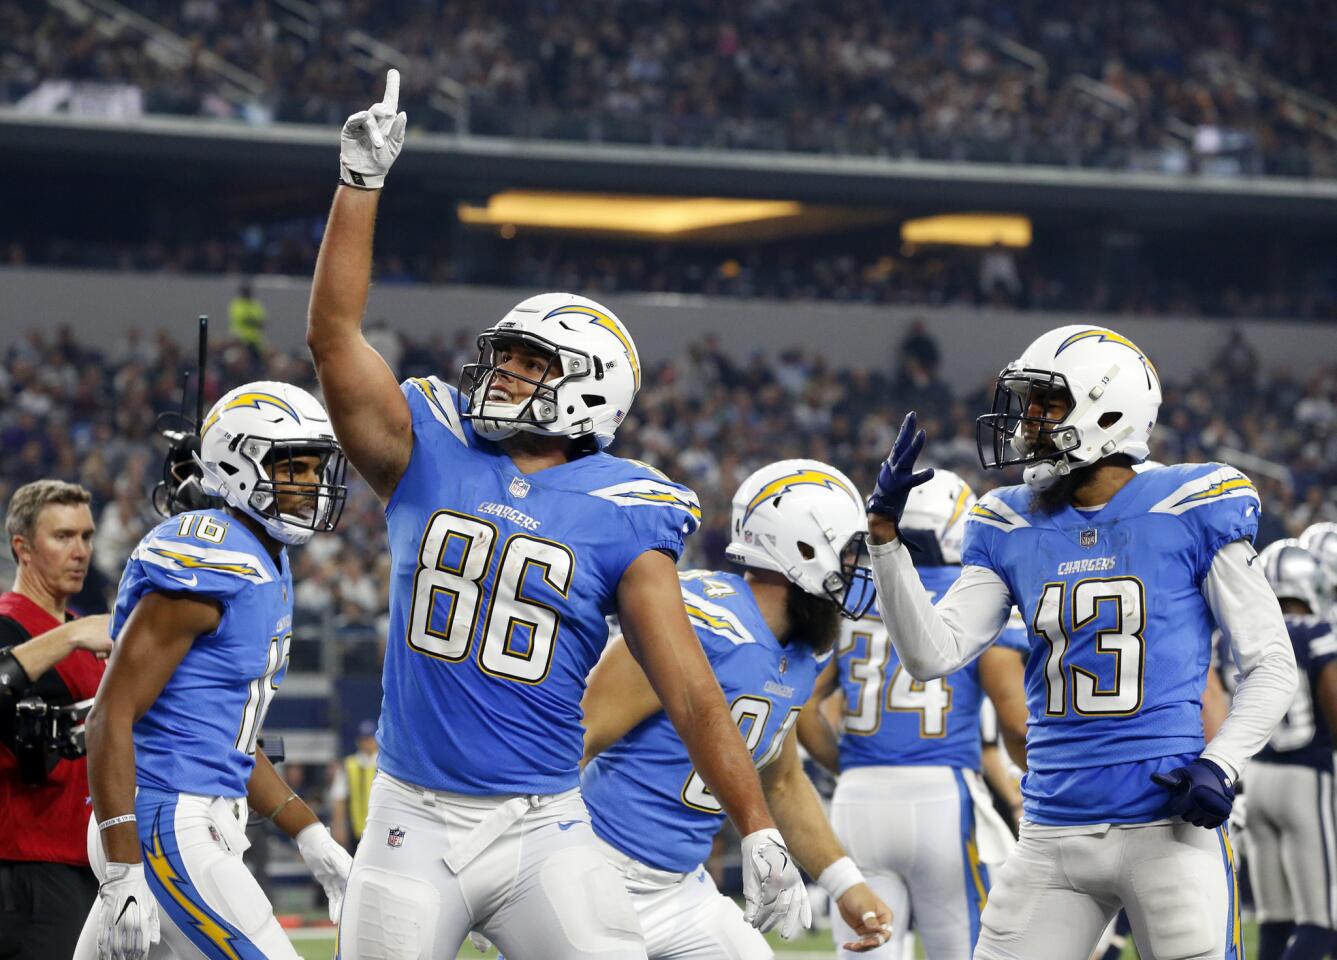 Chargers tight end Hunter Henry (86) celebrates his touchdown catch with teammates Tyrell Williams (16) and Keenan Allen (13) during the second half.